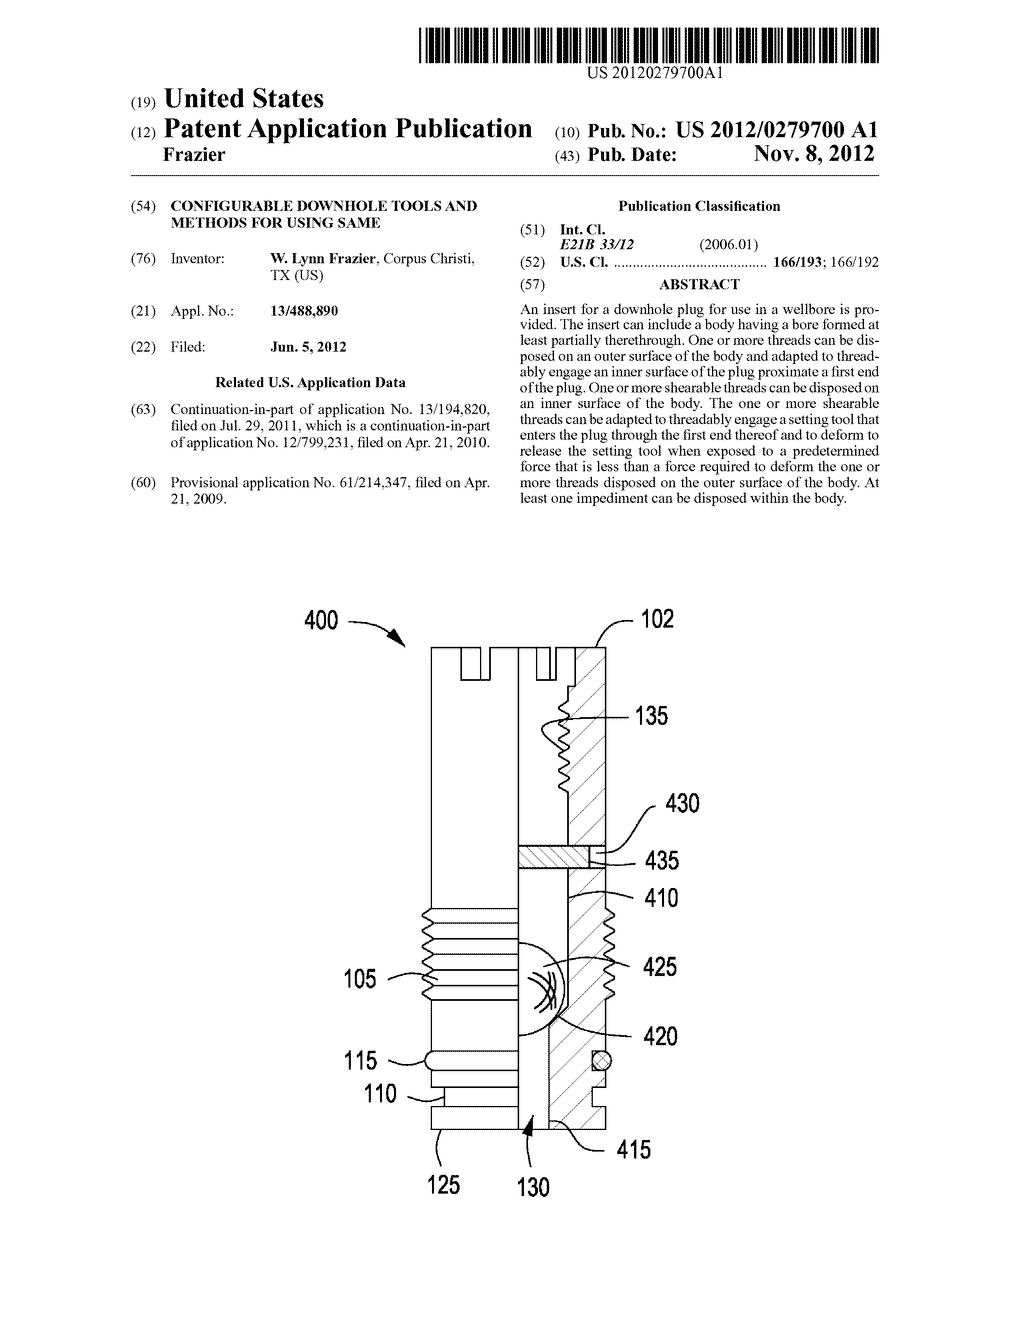 CONFIGURABLE DOWNHOLE TOOLS AND METHODS FOR USING SAME - diagram, schematic, and image 01